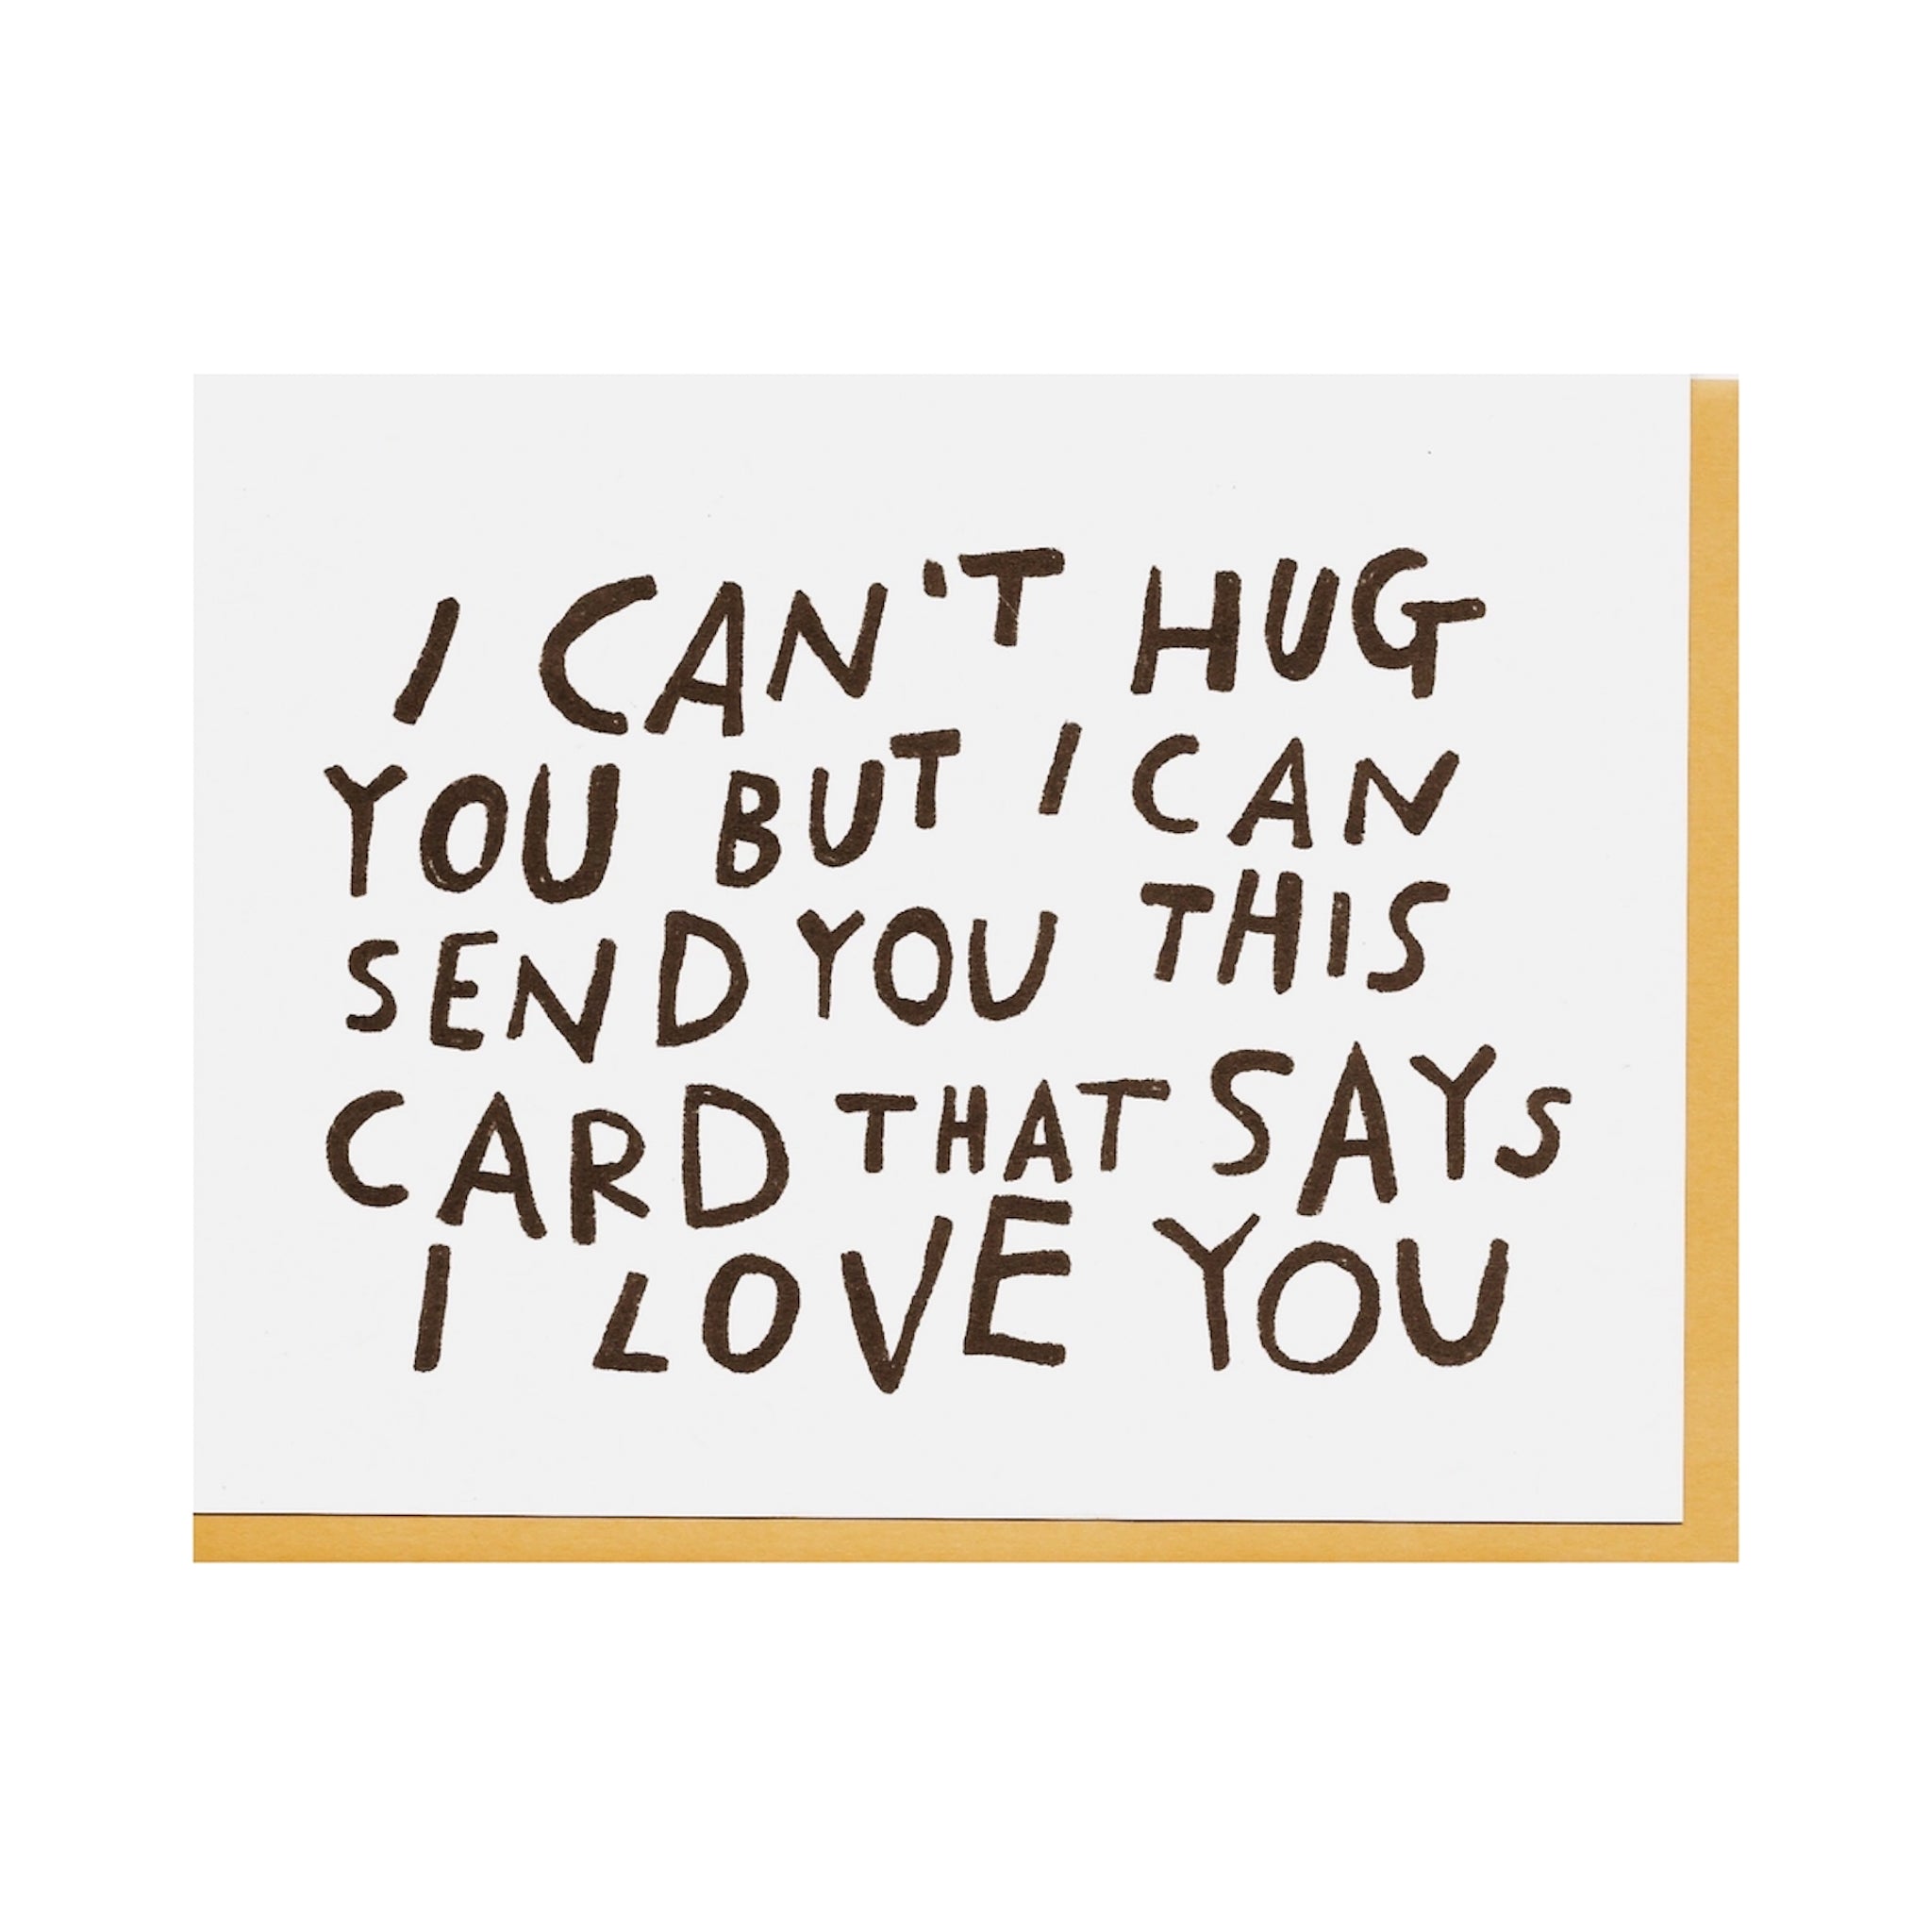 i can't hug you but i can love you card